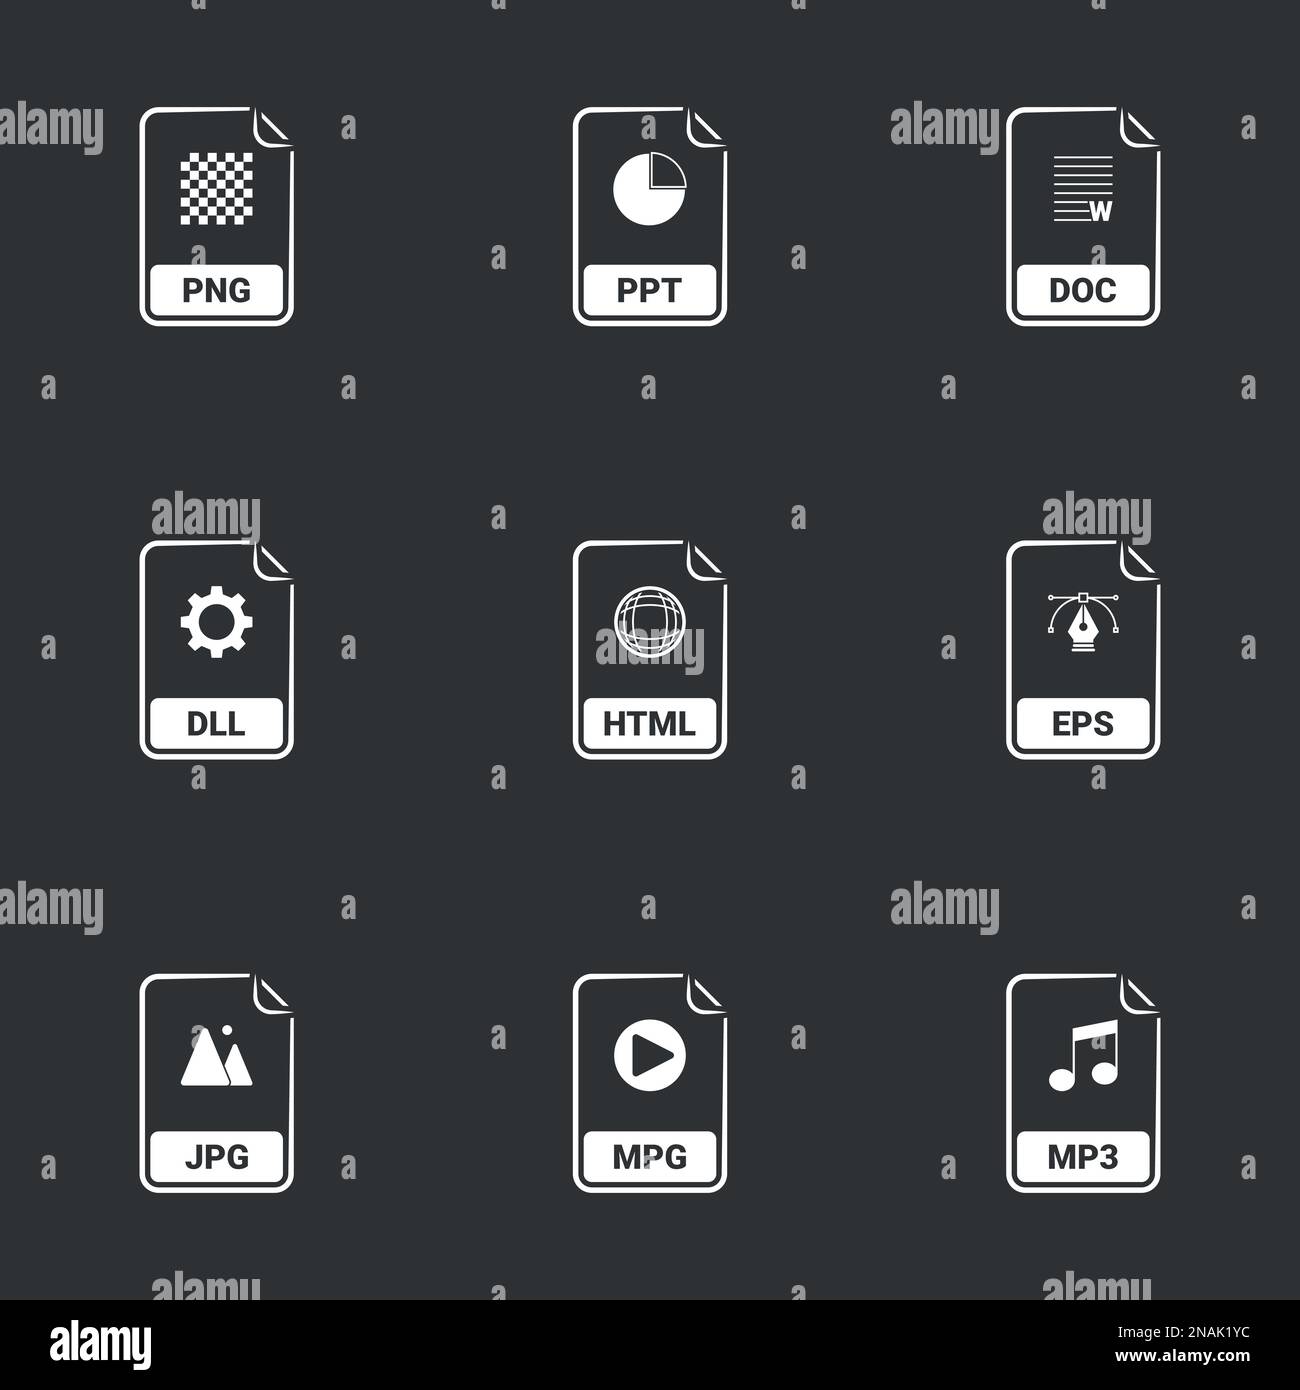 File Types icons. Black background Stock Vector